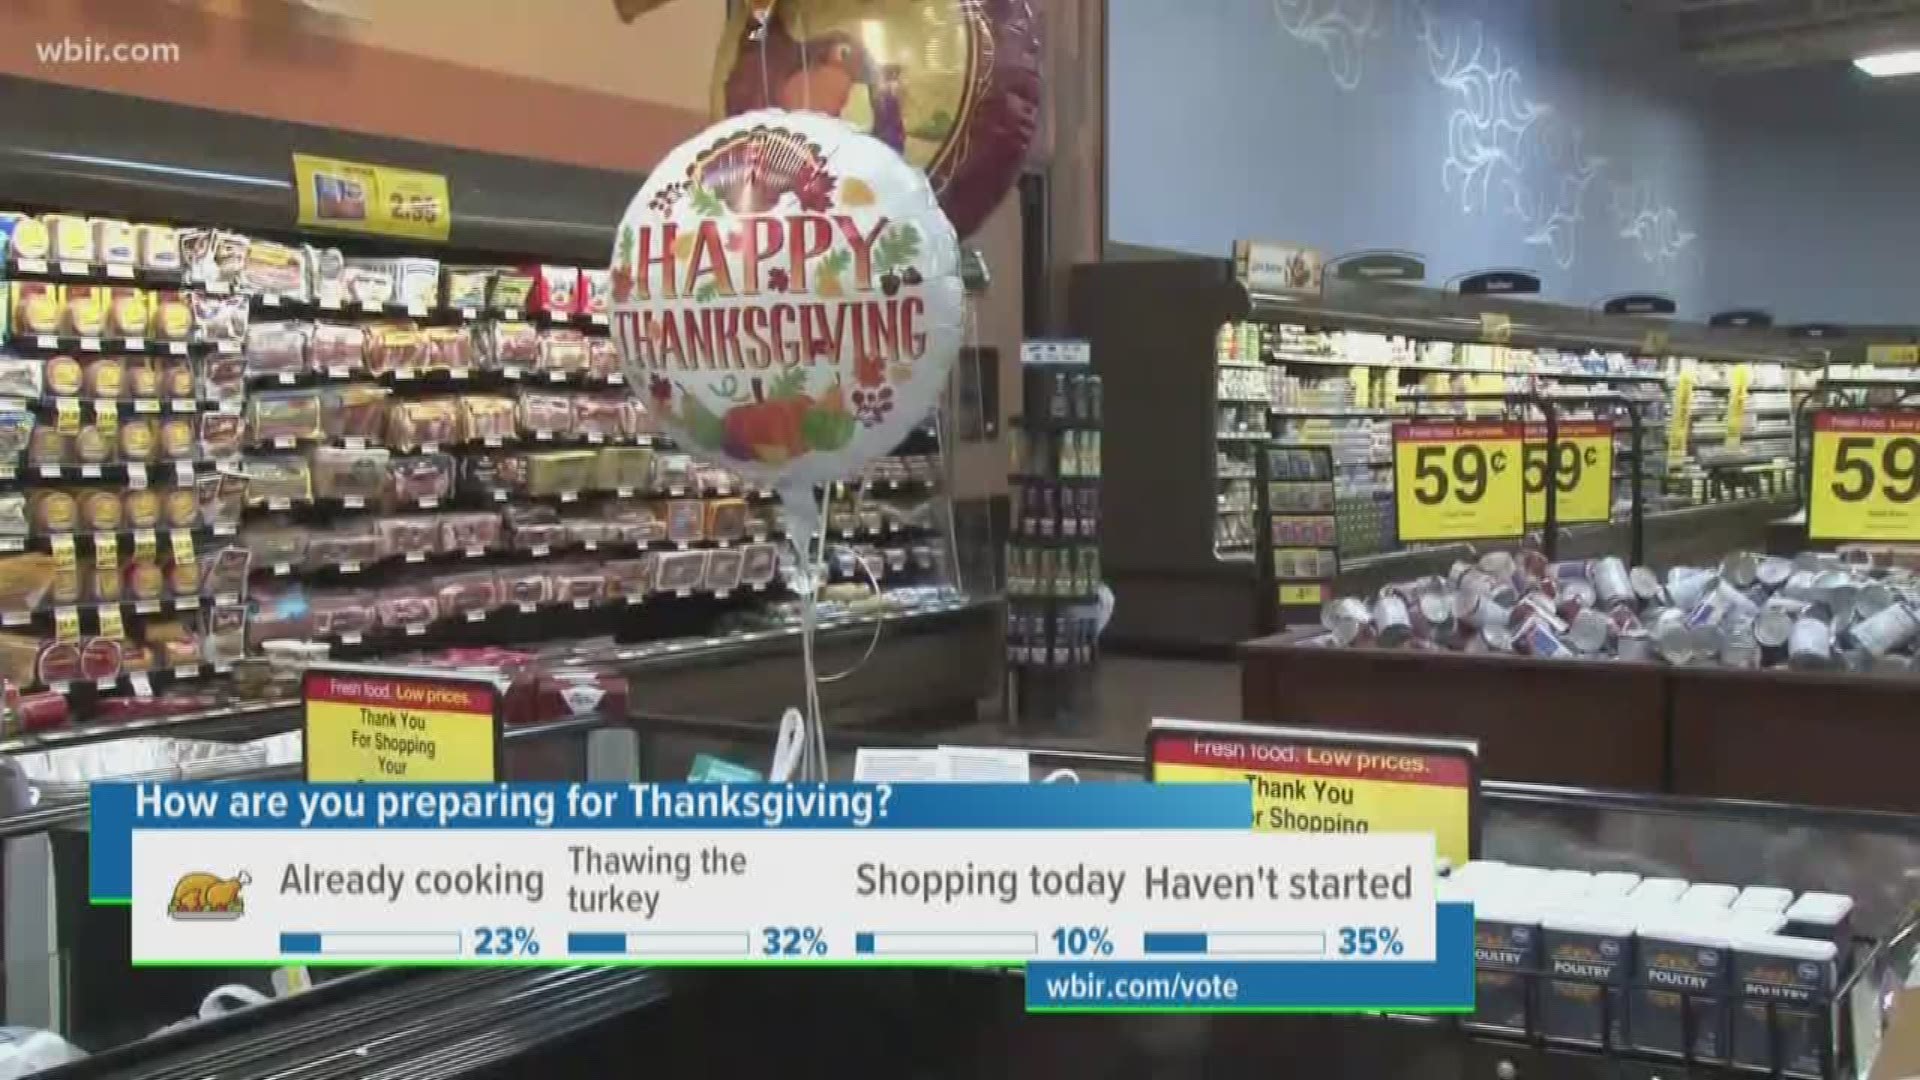 The Tuesday before Thanksgiving is the busiest day for many grocers.